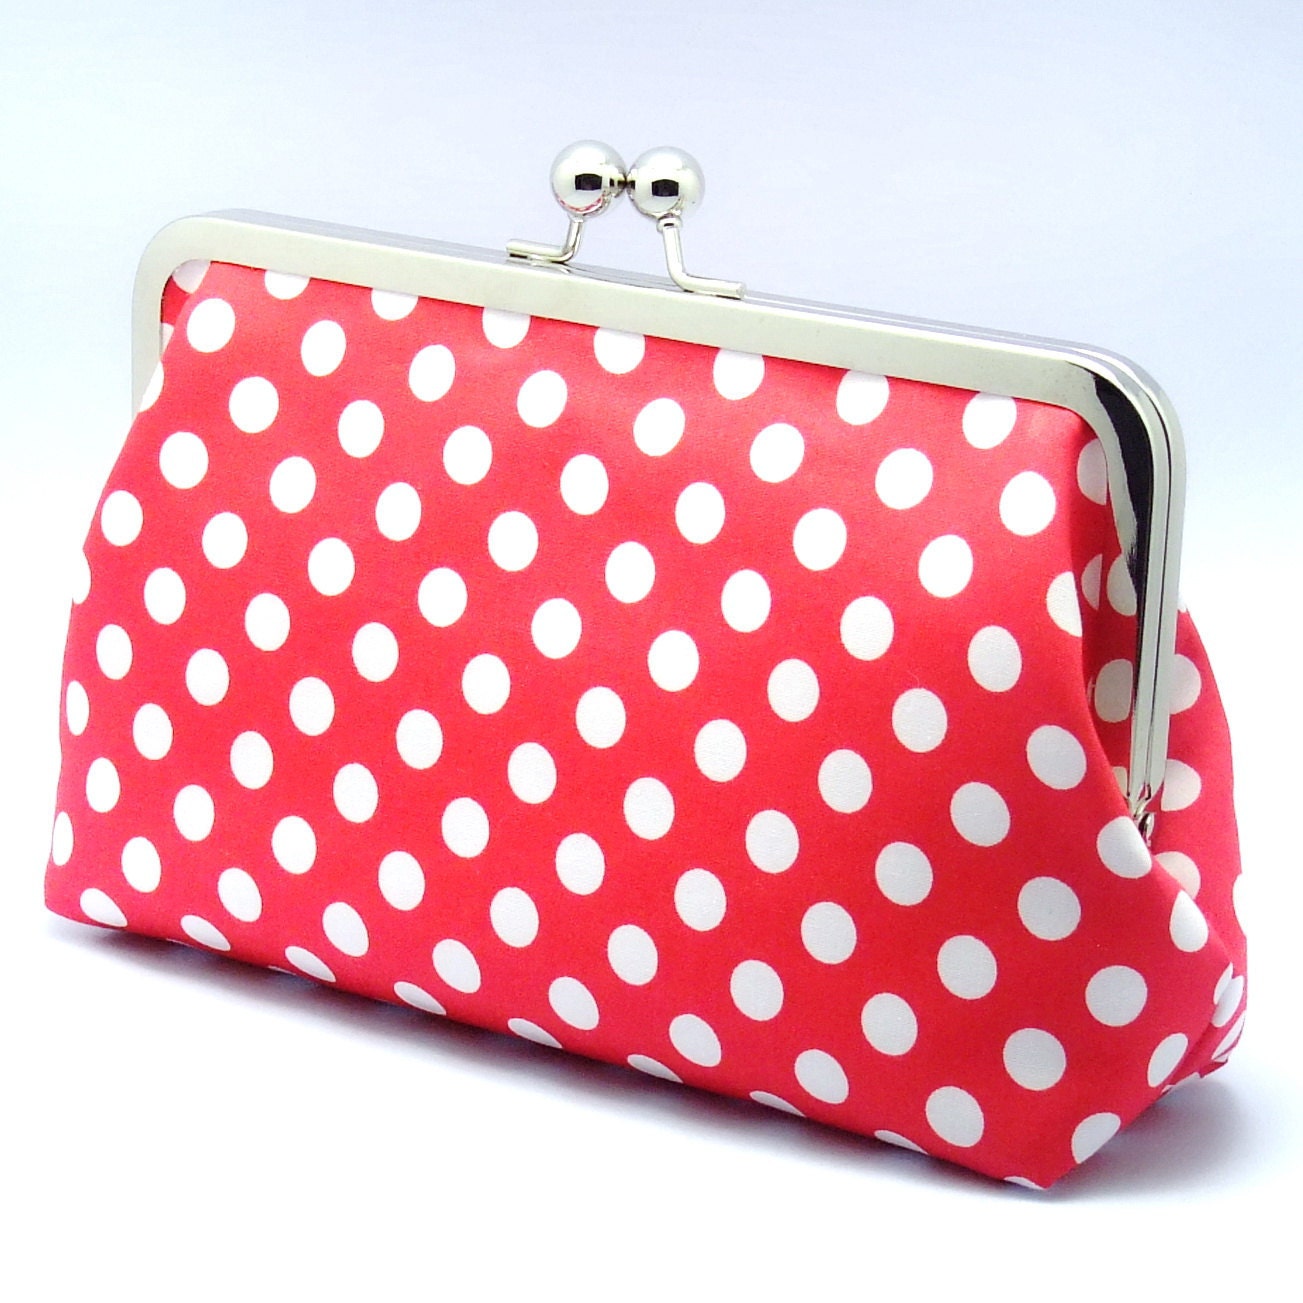 White Polka Dots in Red- Large Clutch Purse (L-040)